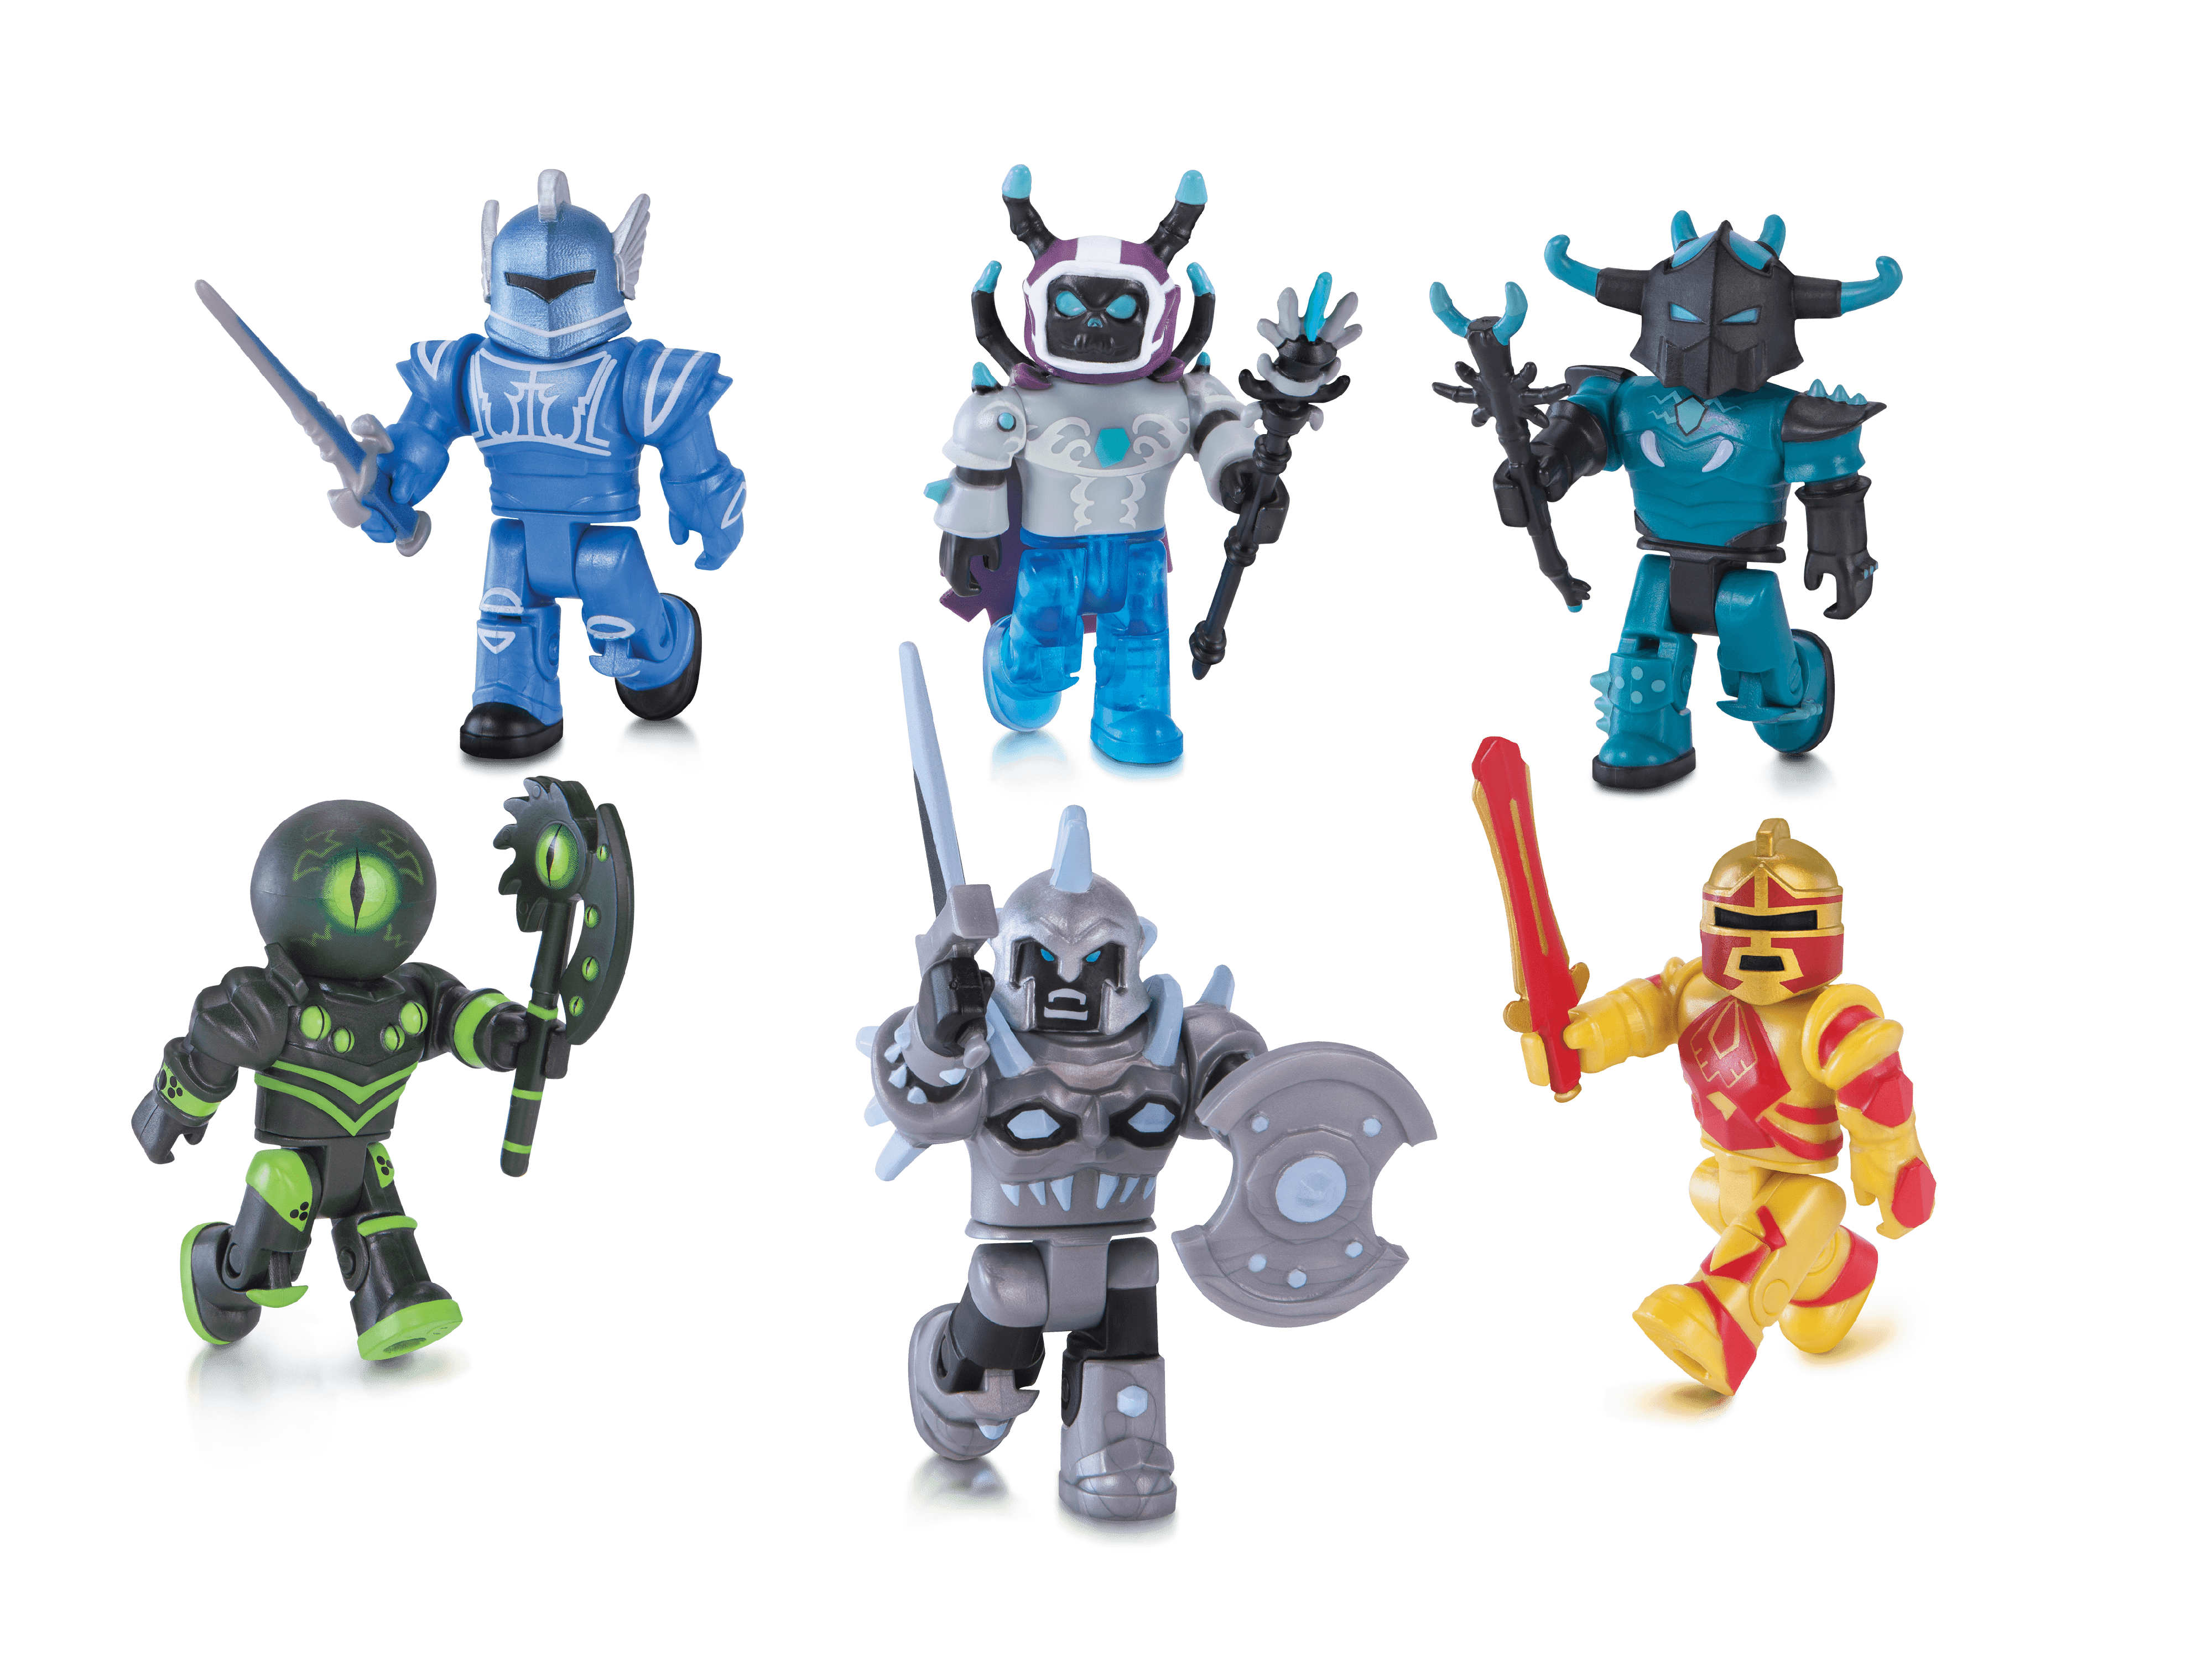 Roblox Action Collection Six Figure Pack Styles May Vary Includes 1 Exclusive Virtual Item Brickseek - batman roblox batcave tycoon home games